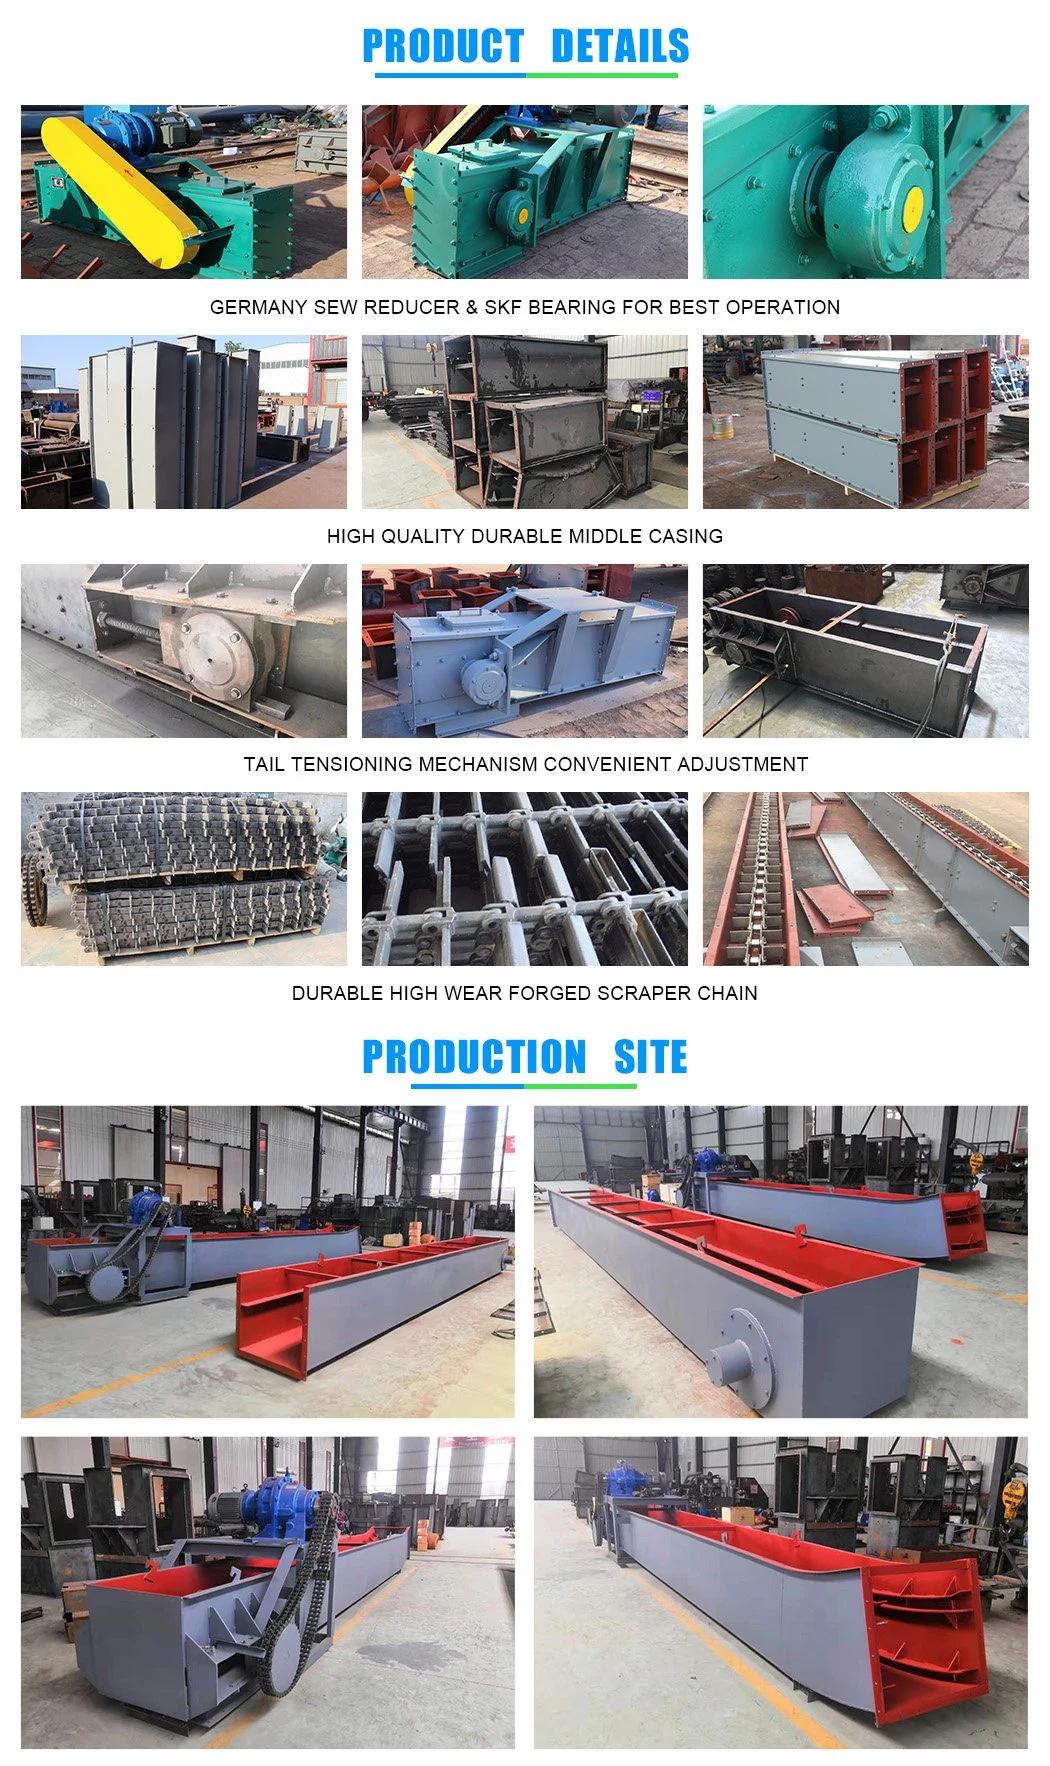 Carbon Steel Flat Bottom Drag Chain Conveyor for Wood Chips